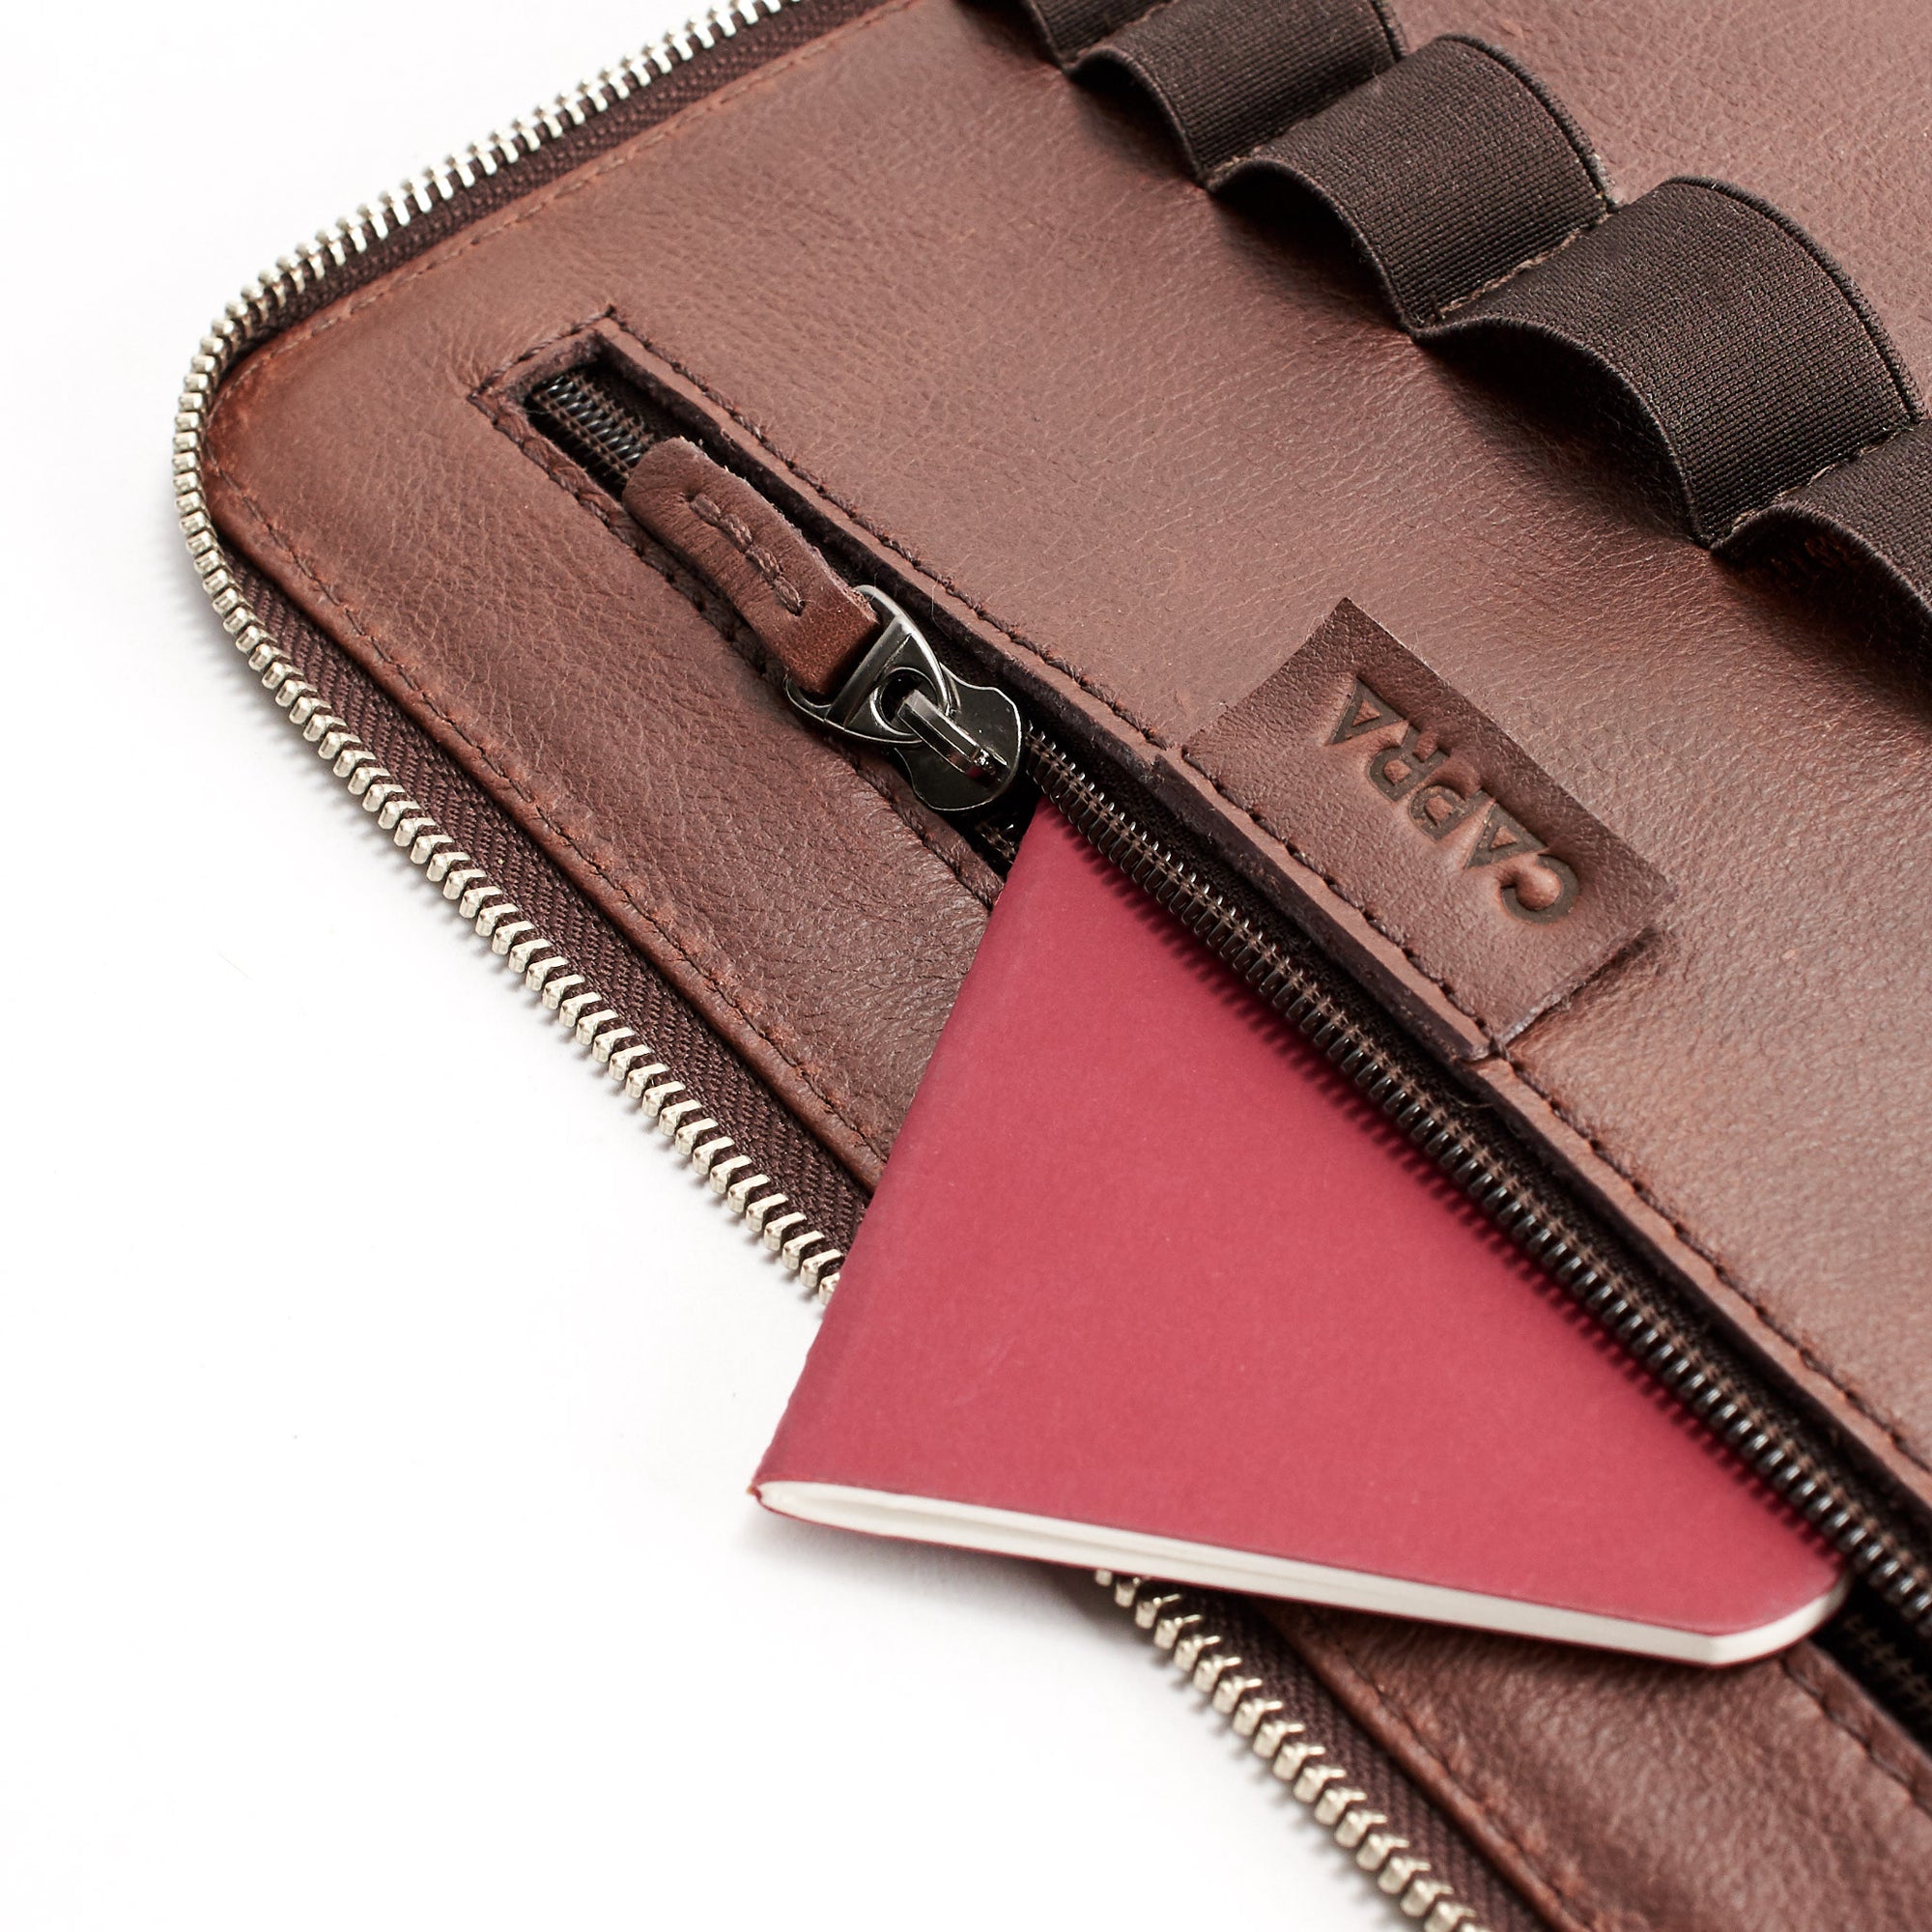 Interior zipped pocket. Best tech pouch brown. Gadget organizer by Capra Leather